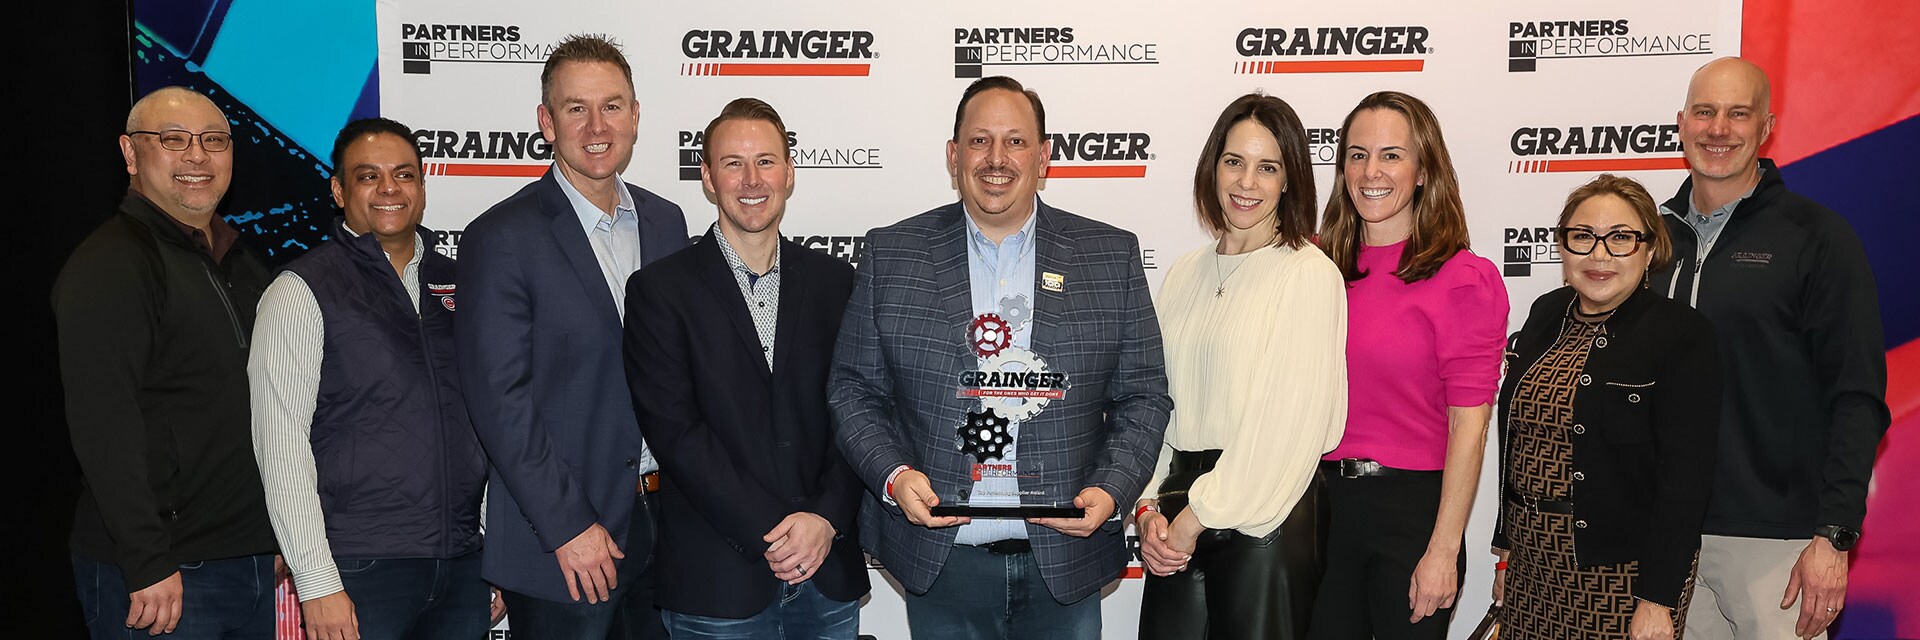 Team photo with Grainger’s Supplier of the Year award